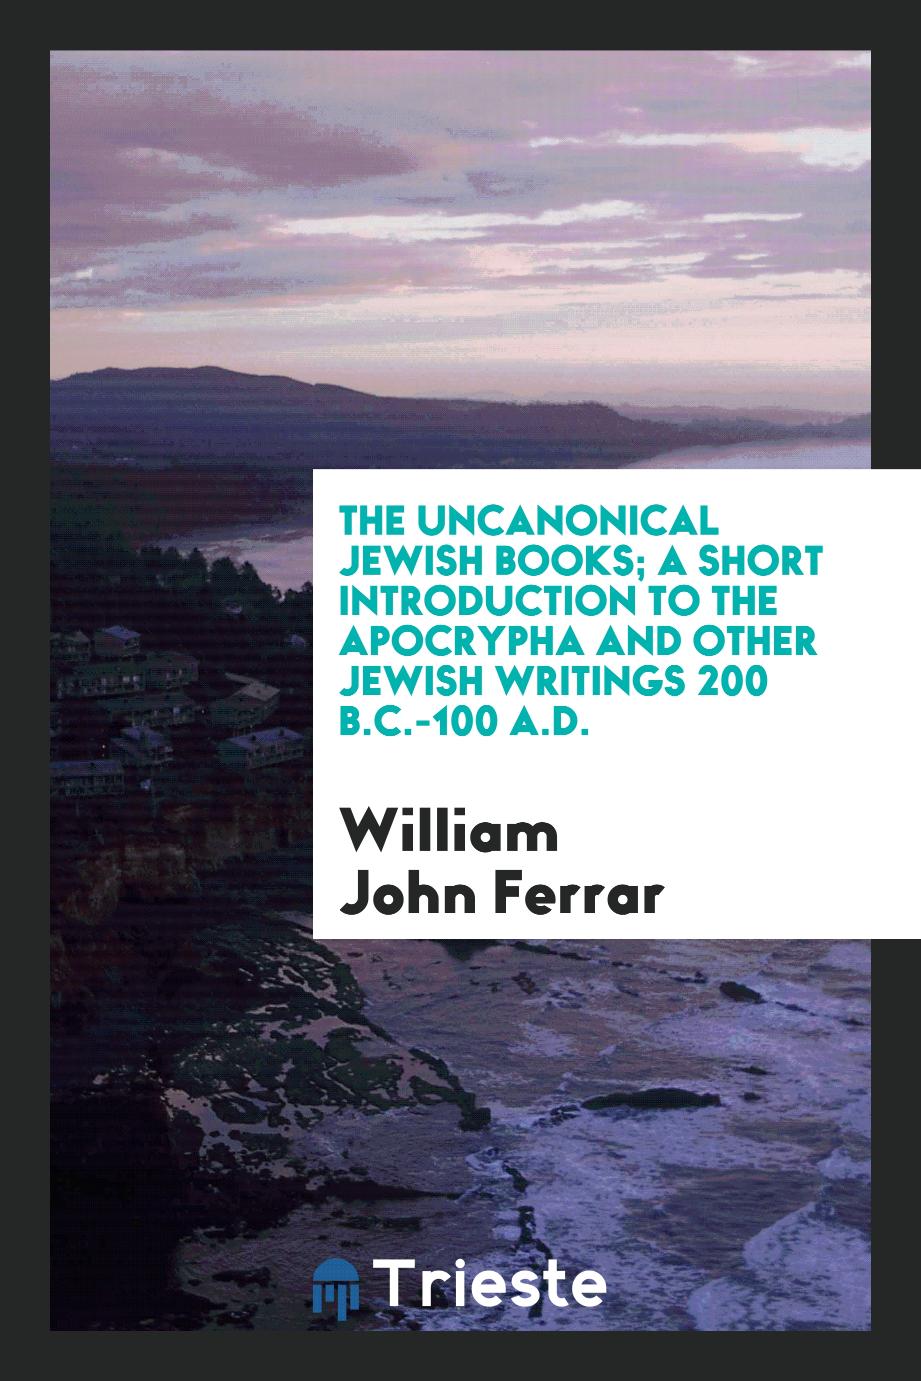 The uncanonical Jewish books; a short introduction to the Apocrypha and other Jewish writings 200 B.C.-100 A.D.